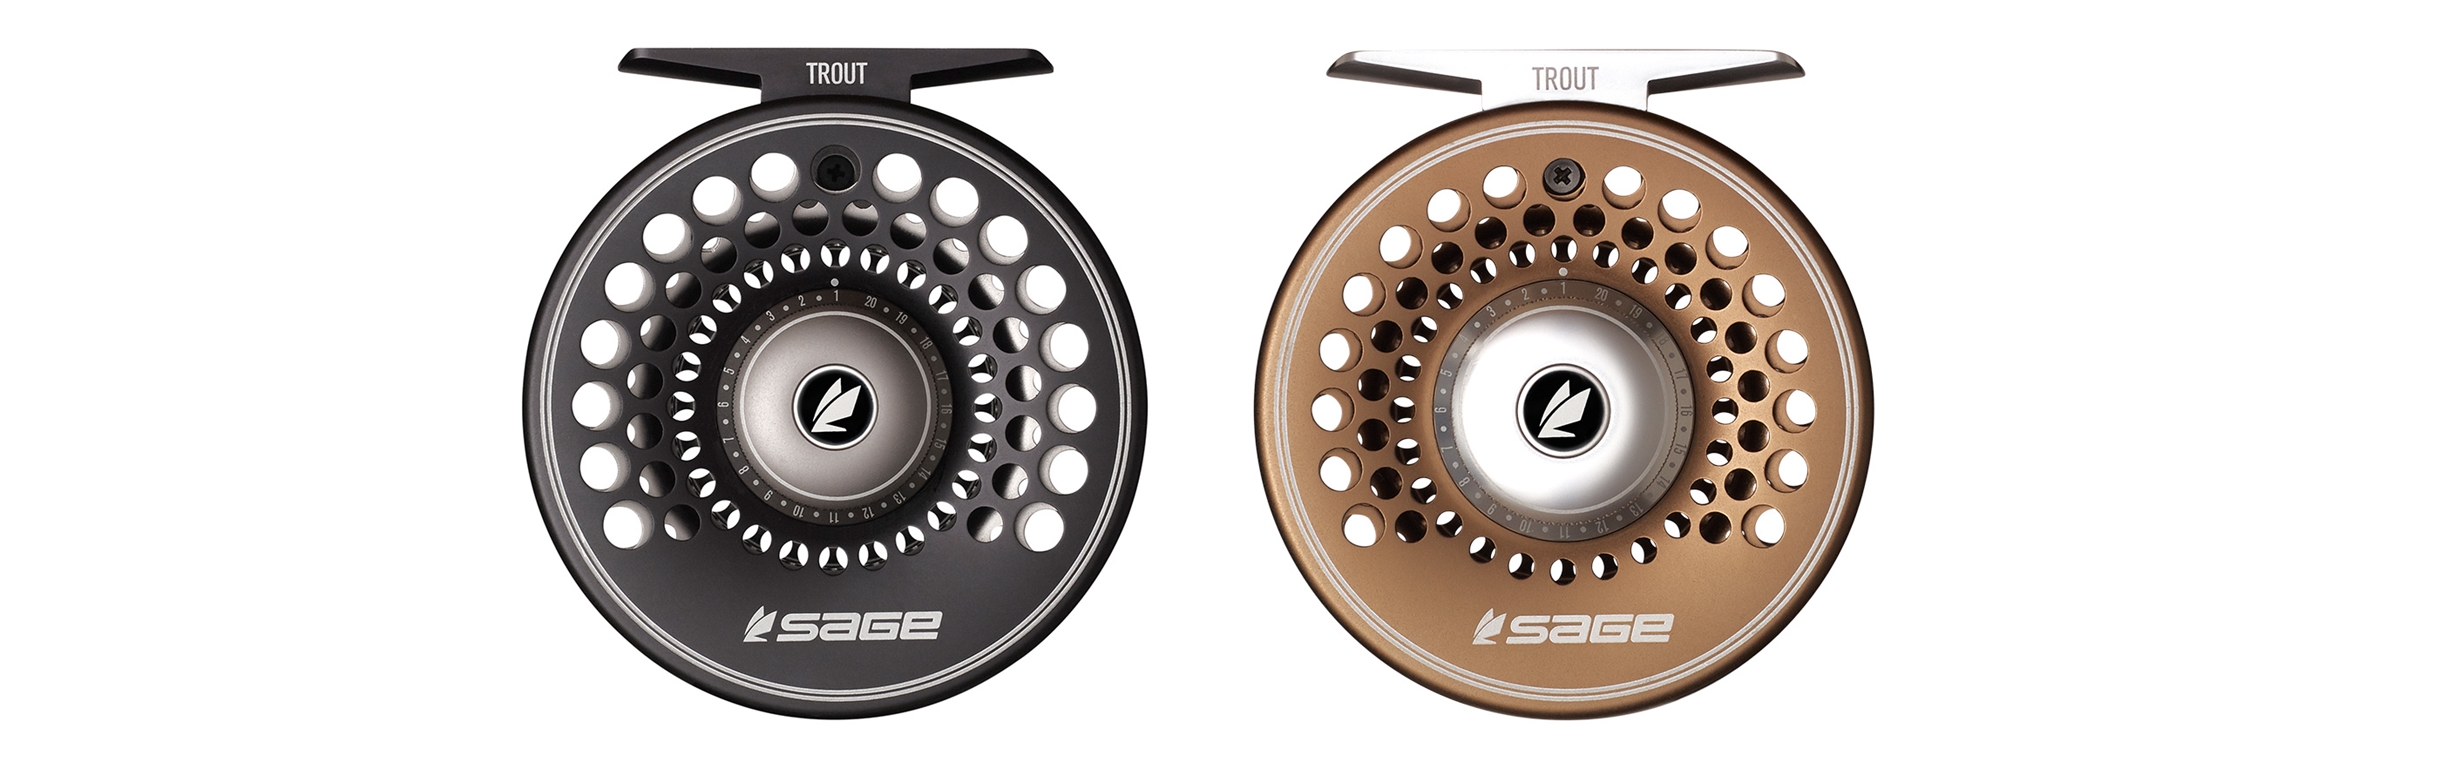 Sage Trout Fly Reel - Hook, Line and Sinker - Guelph's #1 Tackle Store Sage  Trout Fly Reel